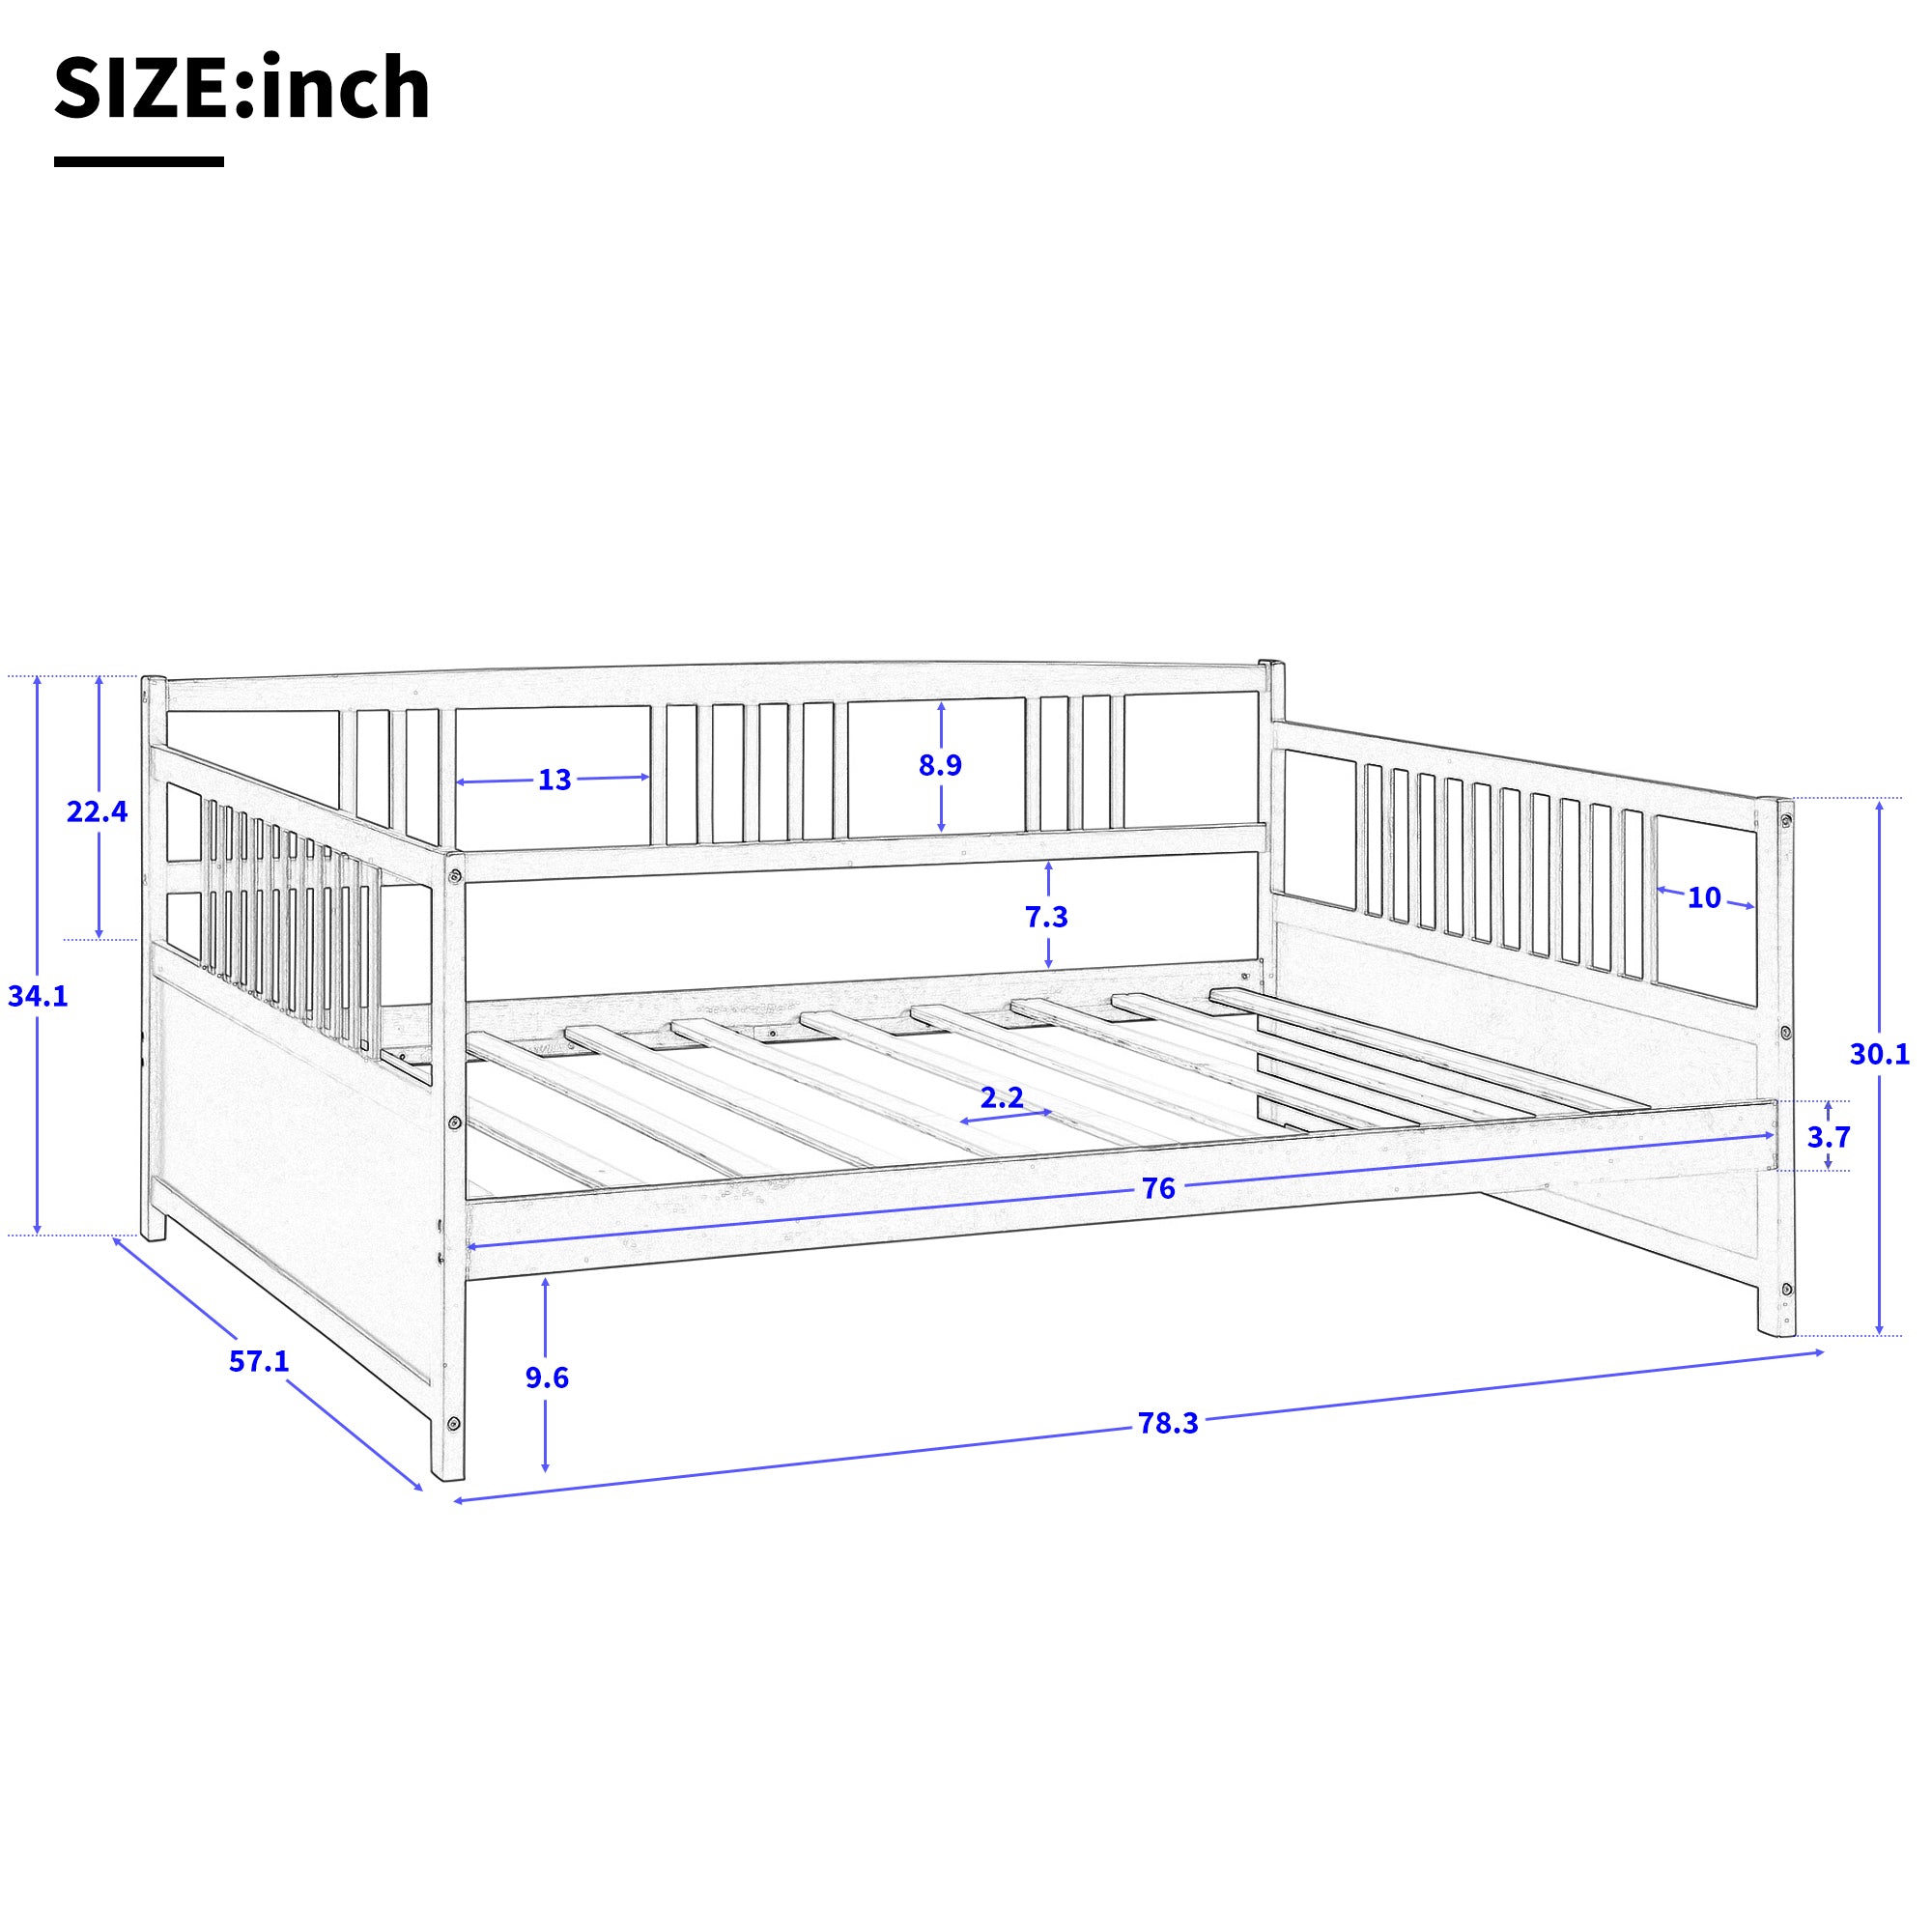 Wood Daybed with Support Legs-White